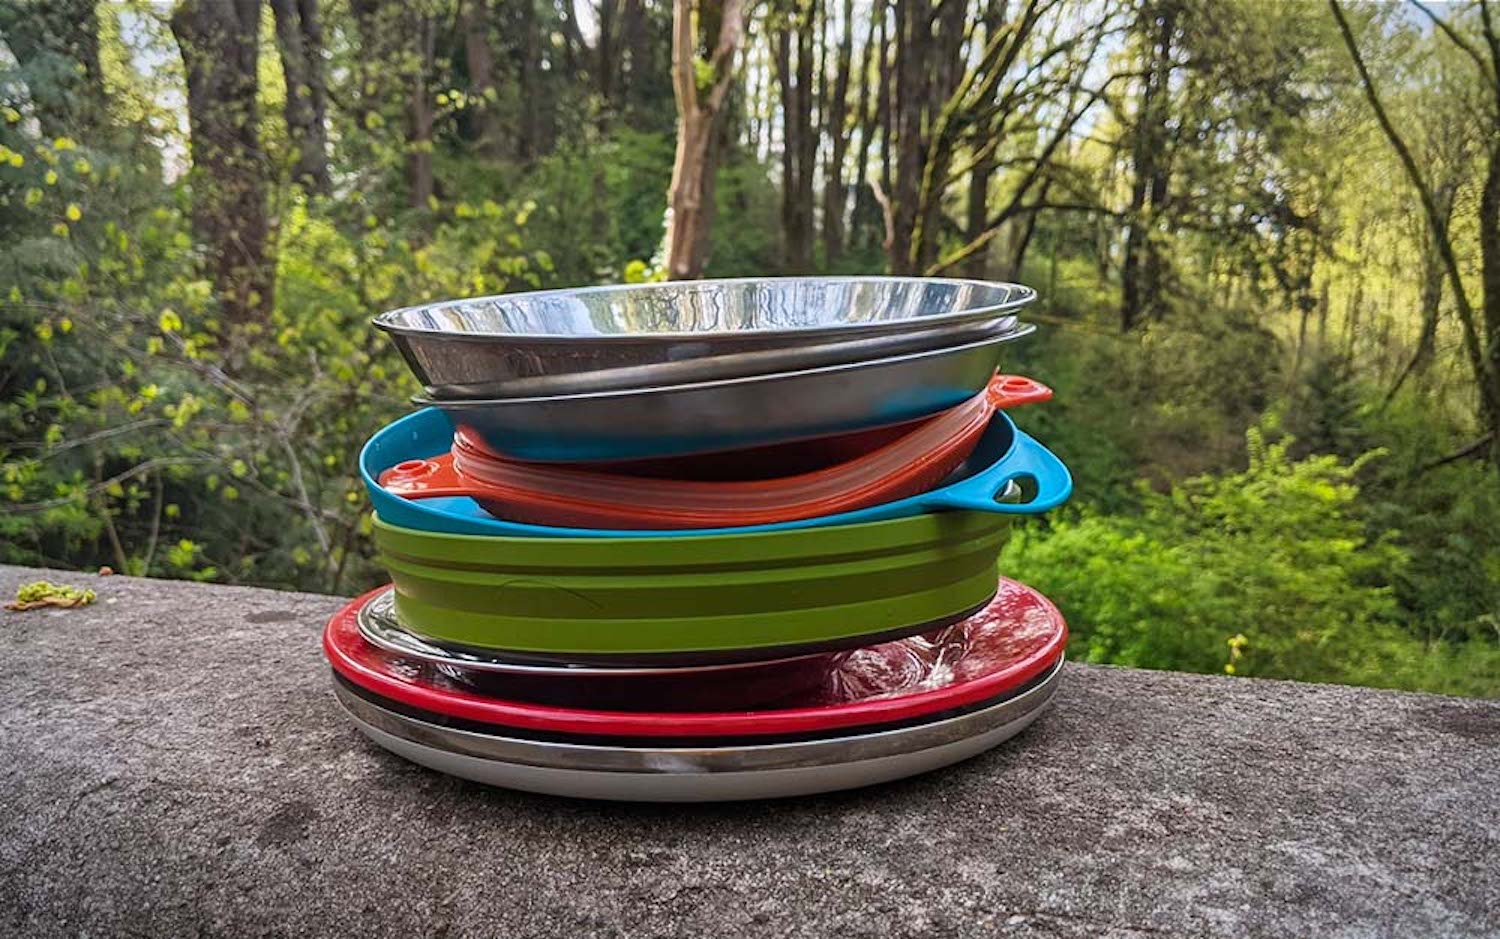 https://www.outdoorlife.com/wp-content/uploads/2022/04/21/CampingDishes_Feature.jpg